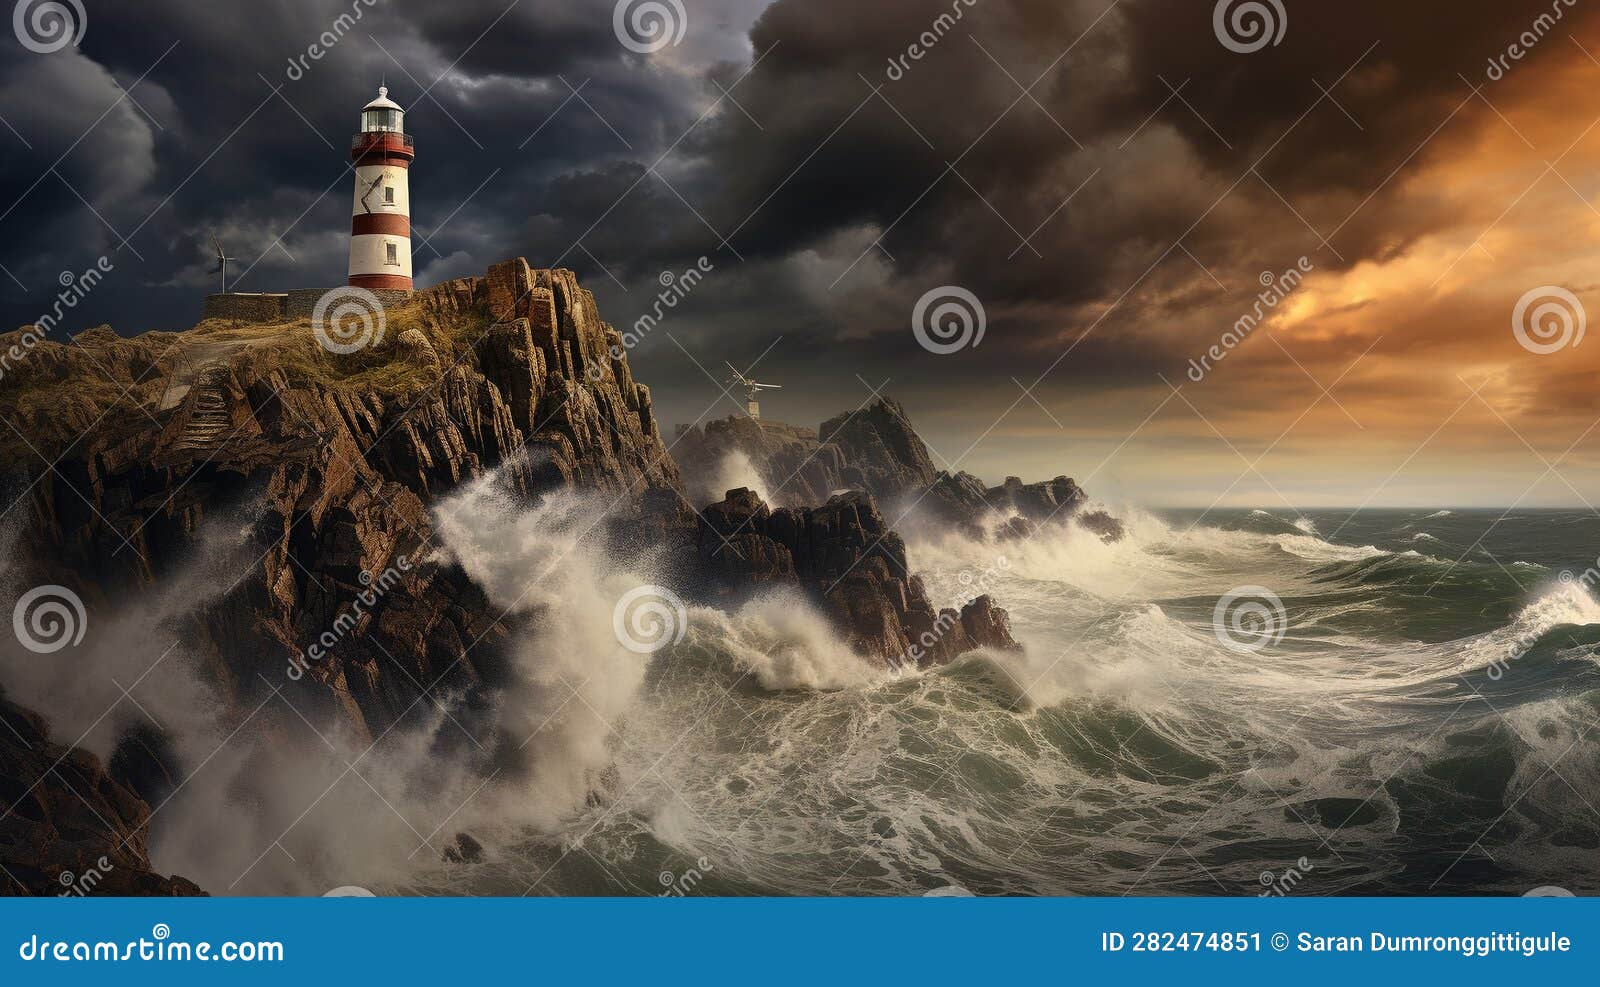 An old lighthouse stands tall on a rocky cliff amidst a raging sea under a stormy sky. A captivating image of an old, weather-beaten lighthouse standing guard on a rocky cliff, against a dramatic stormy sky. The raging sea beneath and the churning dark clouds above add a sense of tension and drama, contrasted by the solitary steadfastness of the lighthouse. Ideal for themes related to resilience, guidance, or turbulent times. This is an AI-generated image.